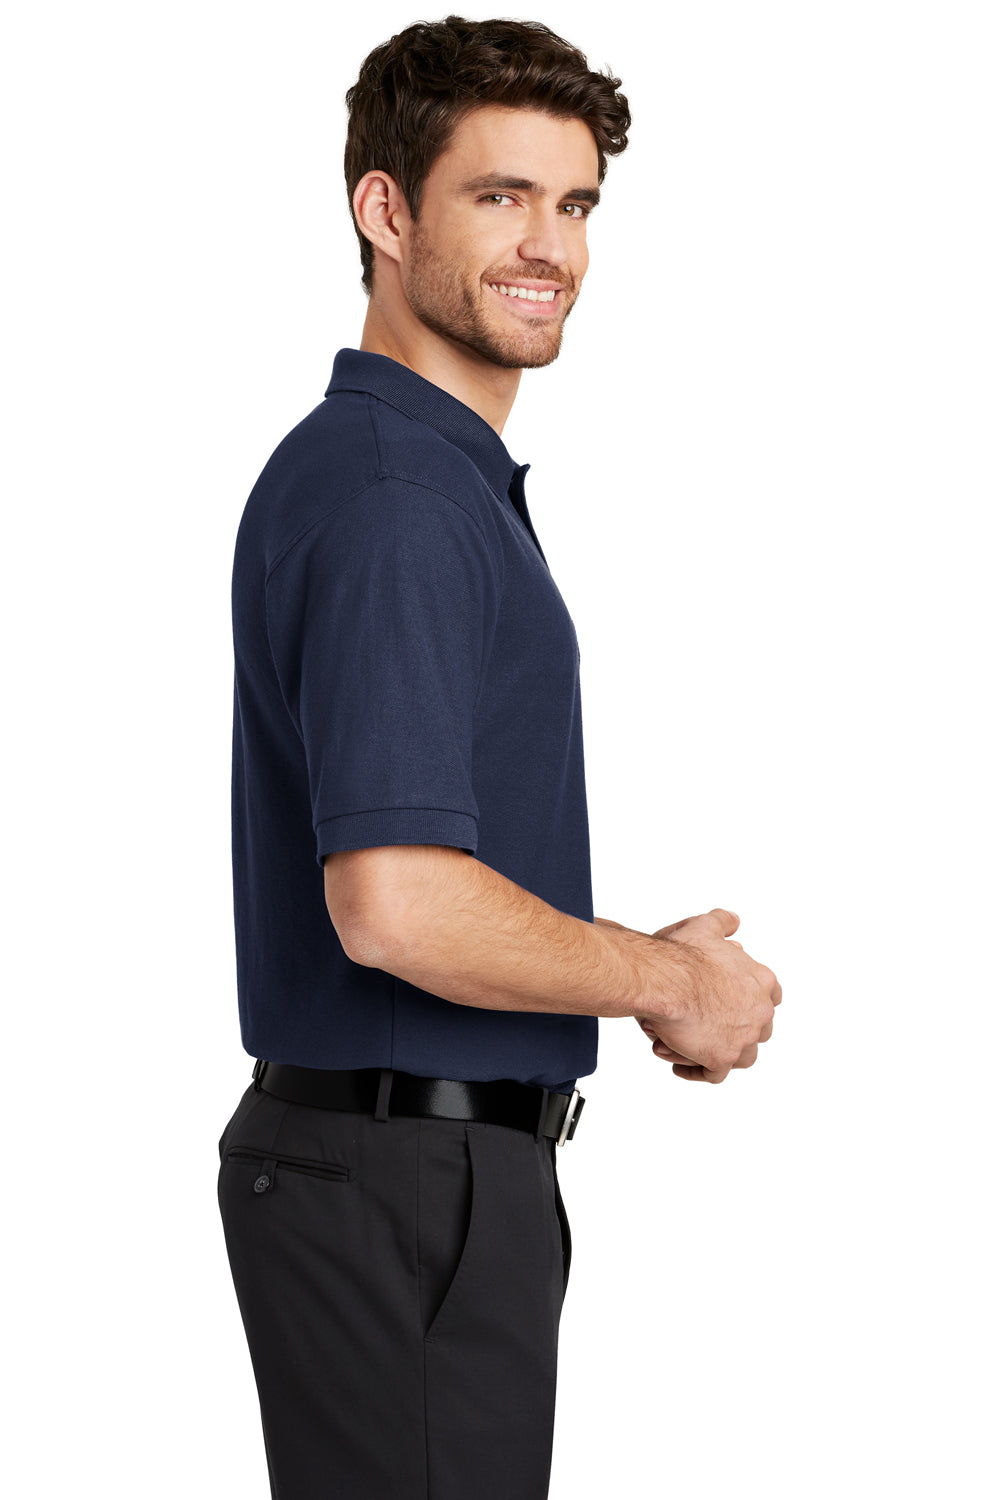 Port Authority K500P Mens Silk Touch Wrinkle Resistant Short Sleeve Polo Shirt w/ Pocket Navy Blue Side